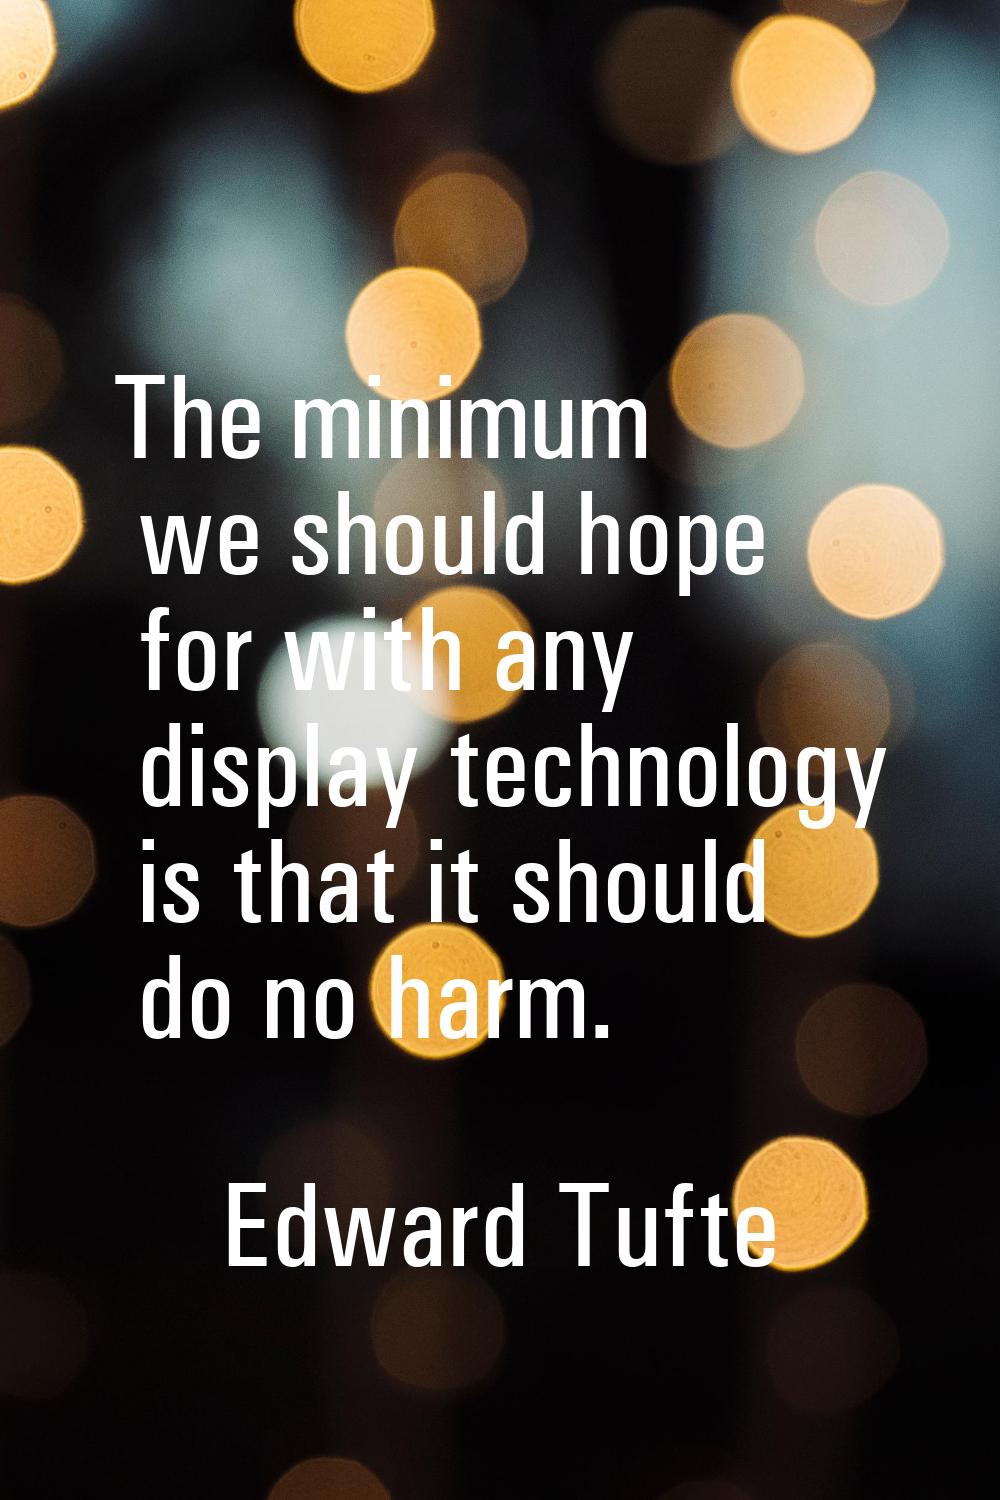 The minimum we should hope for with any display technology is that it should do no harm.